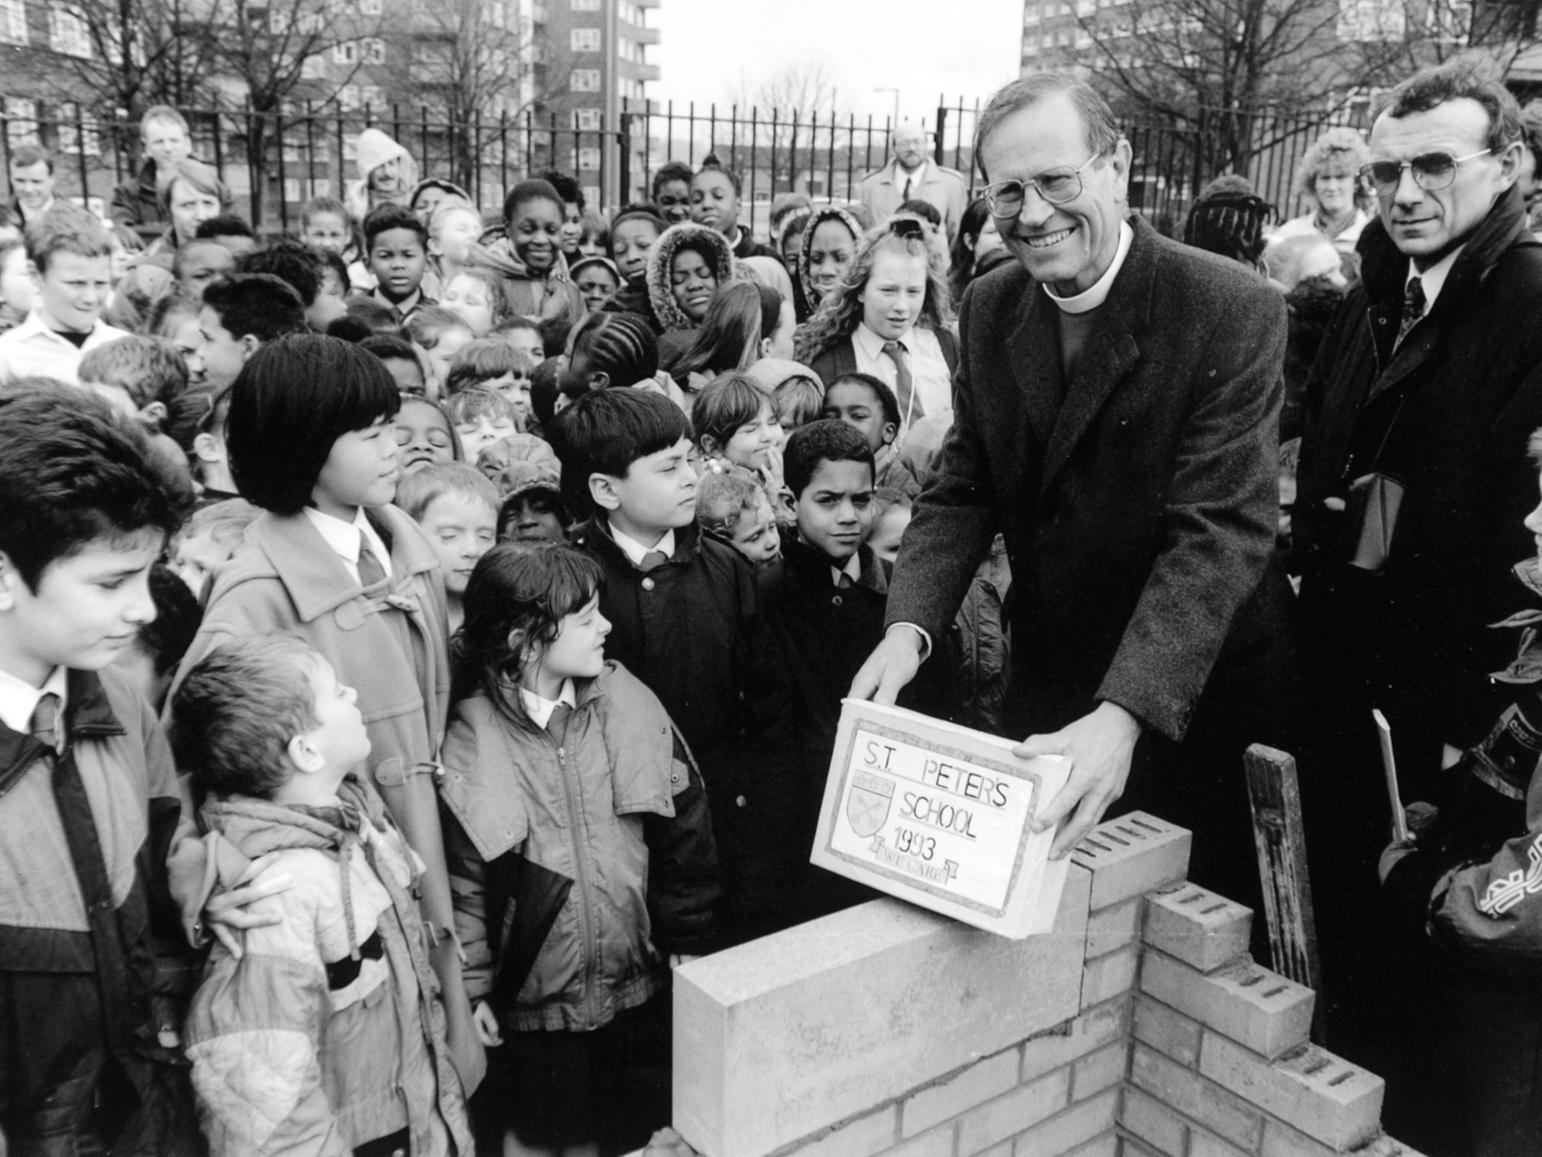 The Bishop of Ripon, the Right Reverend David Young, surrounded by children as he lays a foundation stone at the new St. Peter's C of E School in Burmantofts.